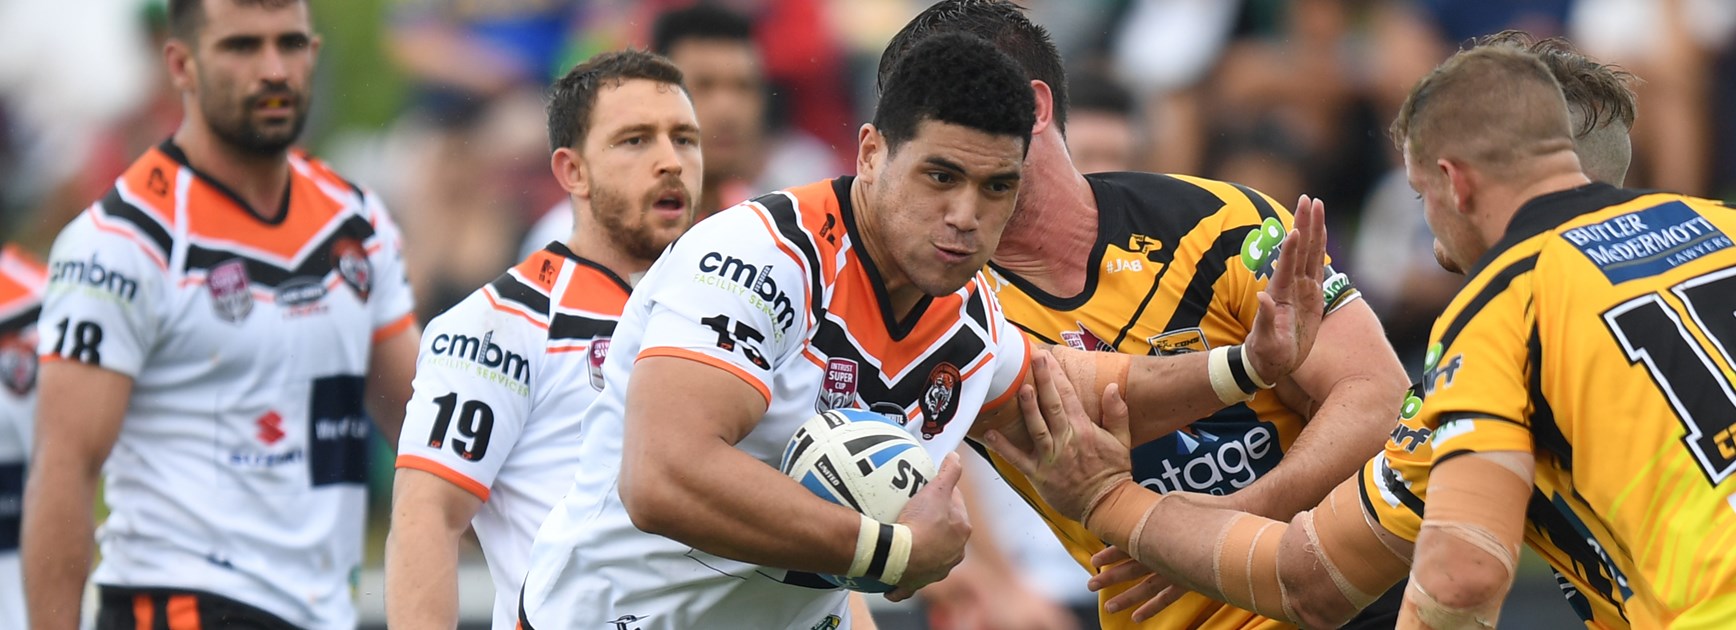 2019 Year in Review: Easts Tigers